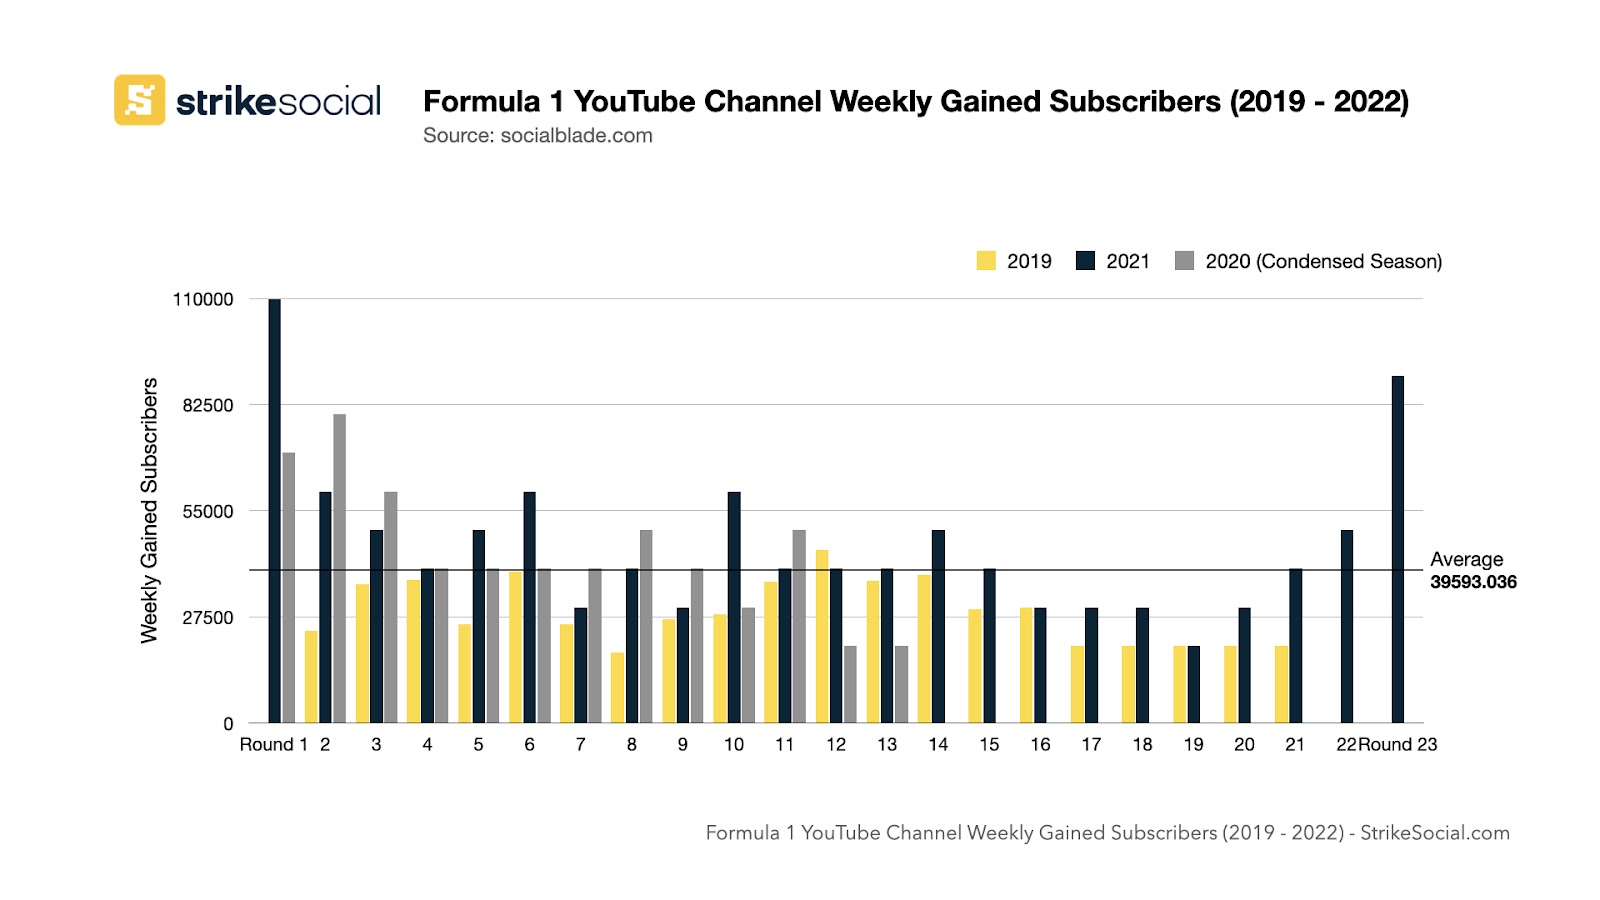 Formula 1 YouTube Channel Weekly Gained Subscribers